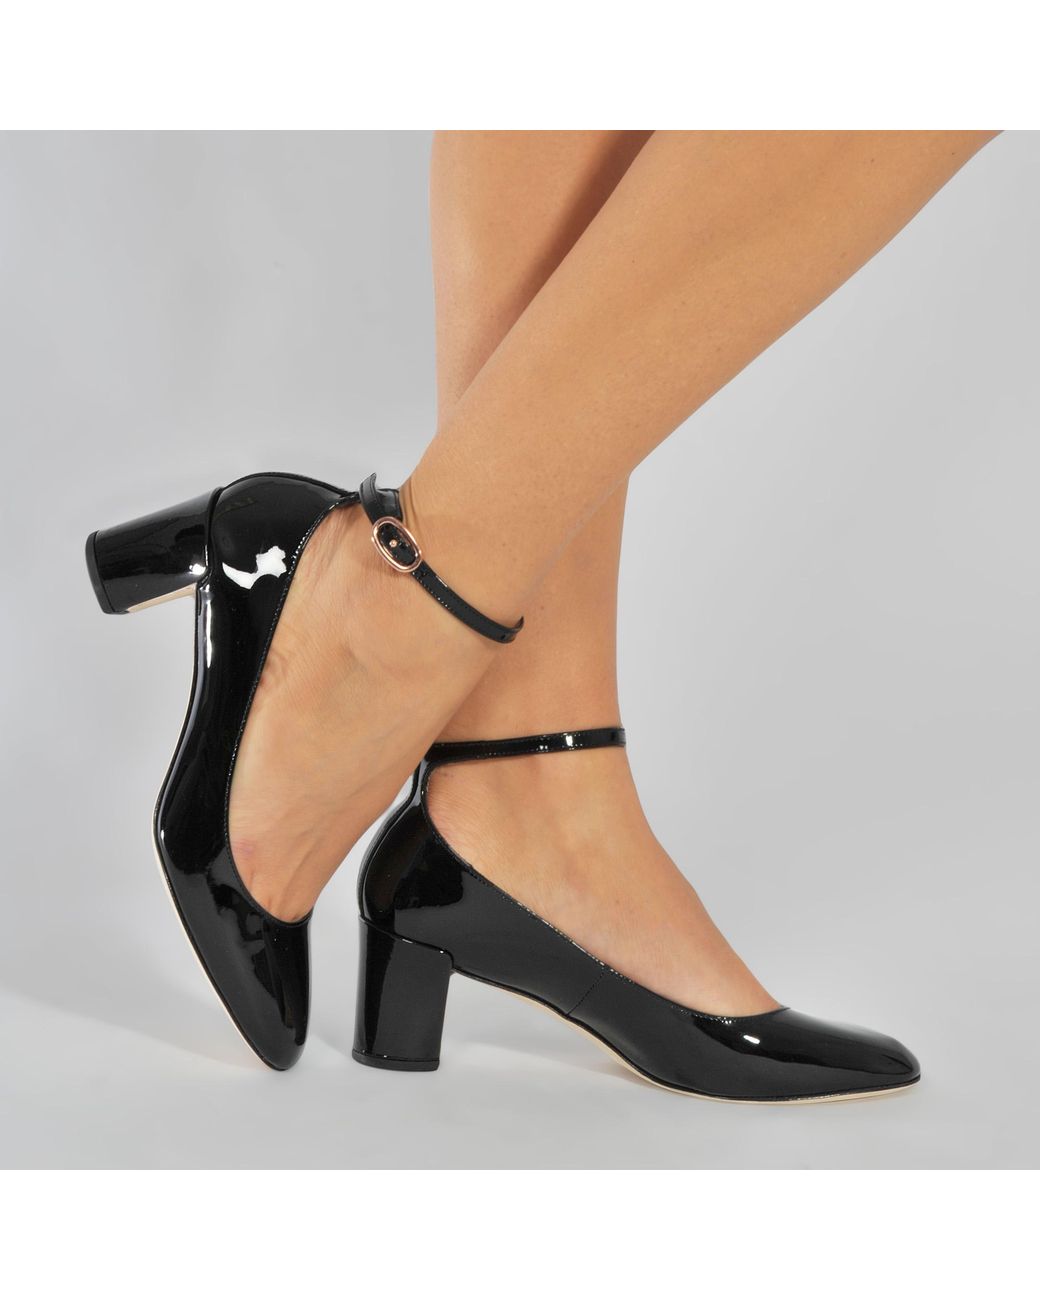 Repetto Electra Patent Mary Jane in Black | Lyst